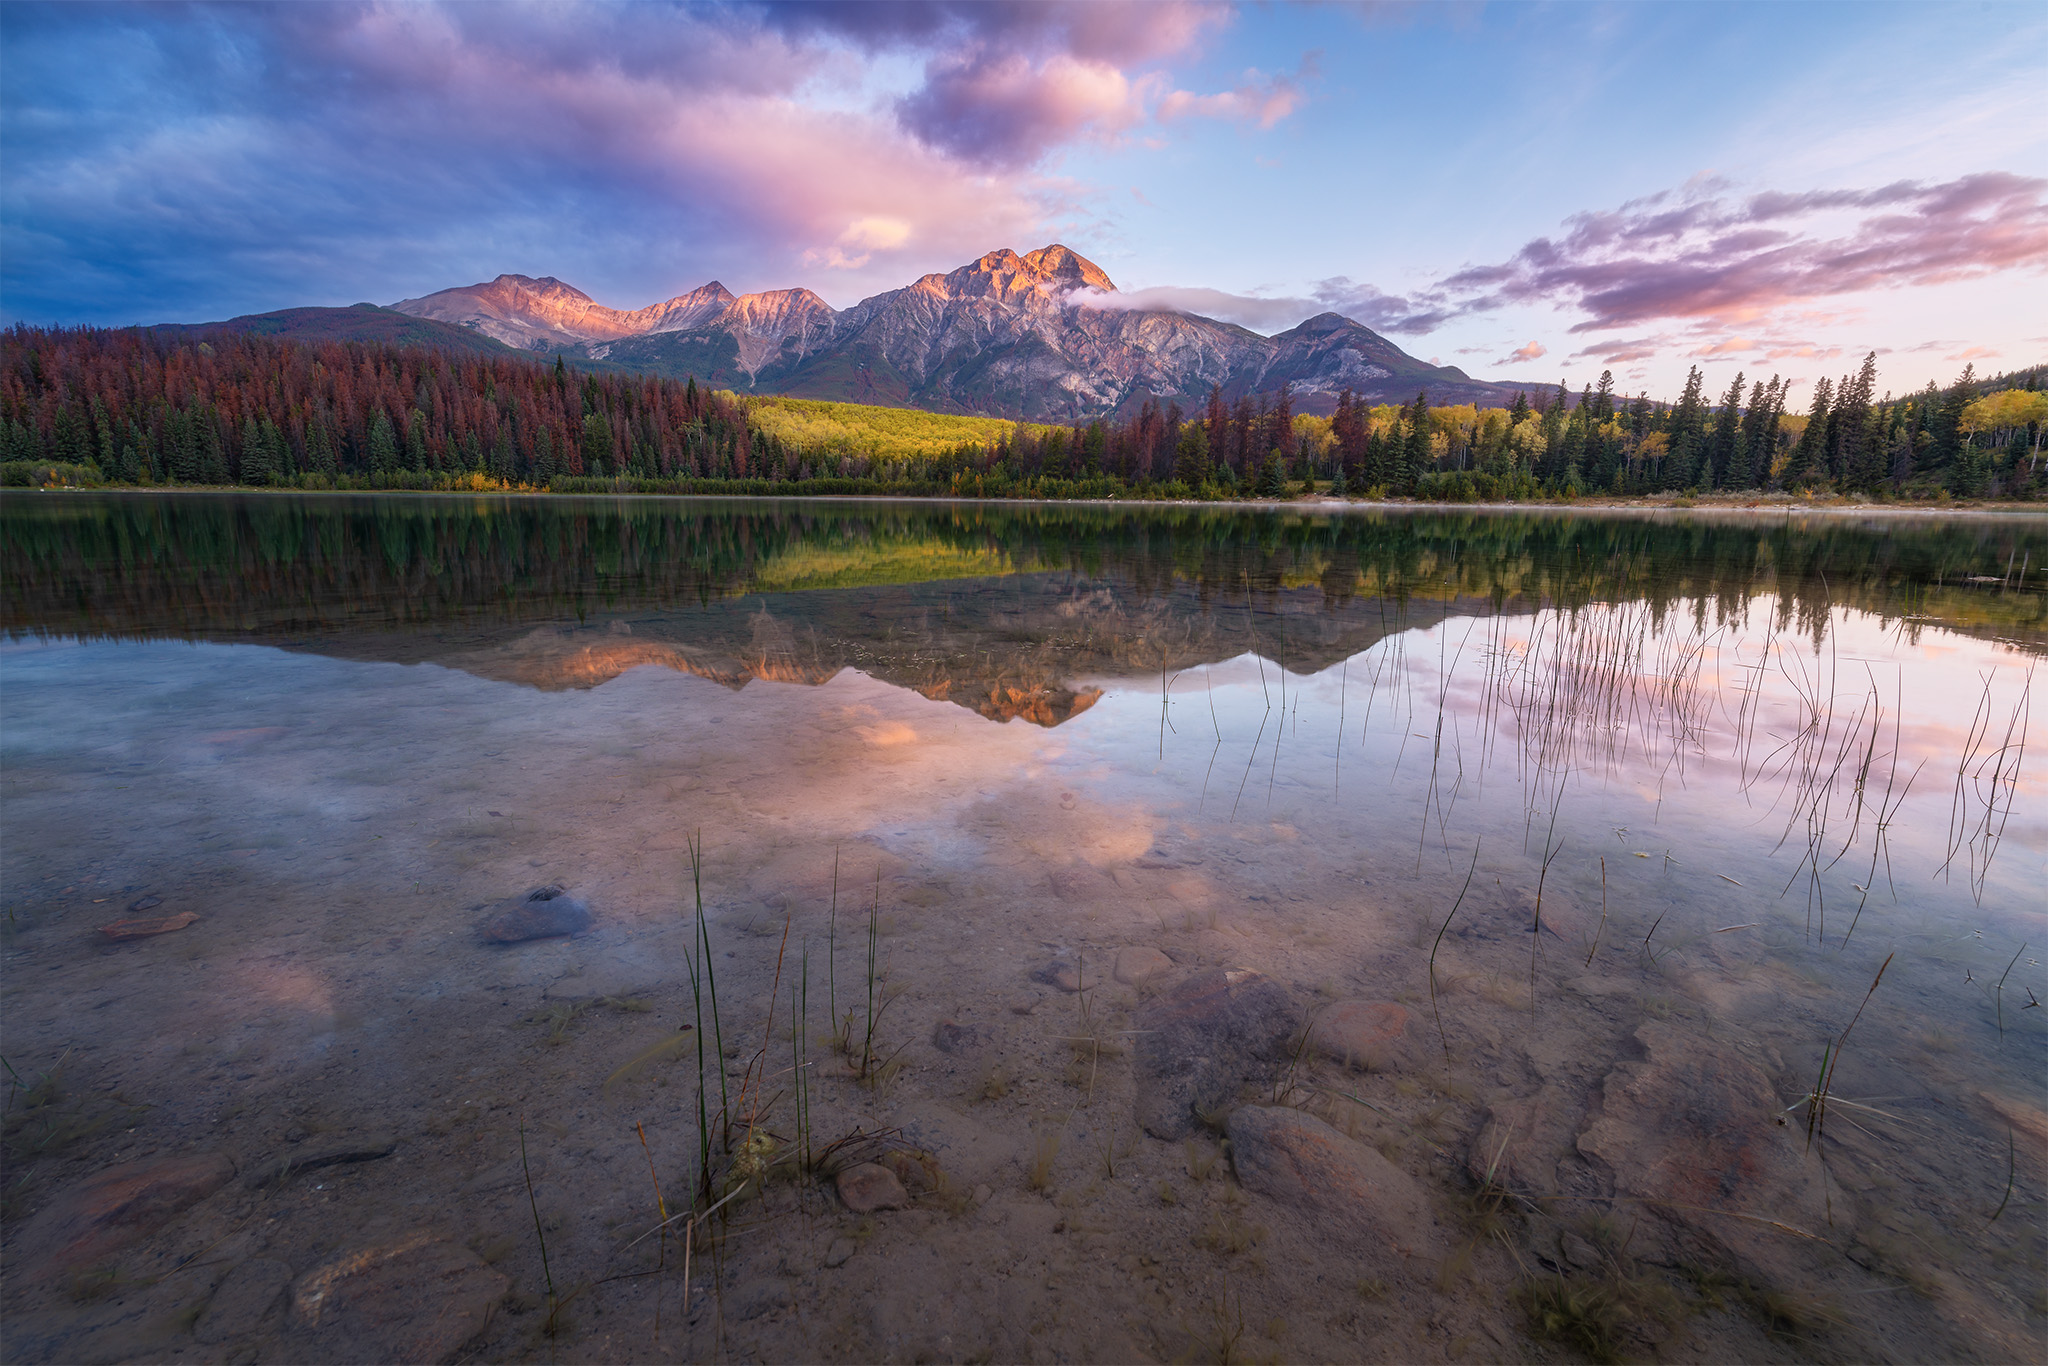 Landscape Photography of Pyramid Mountain and Patricia Lake in Jasper National Park at sunrise